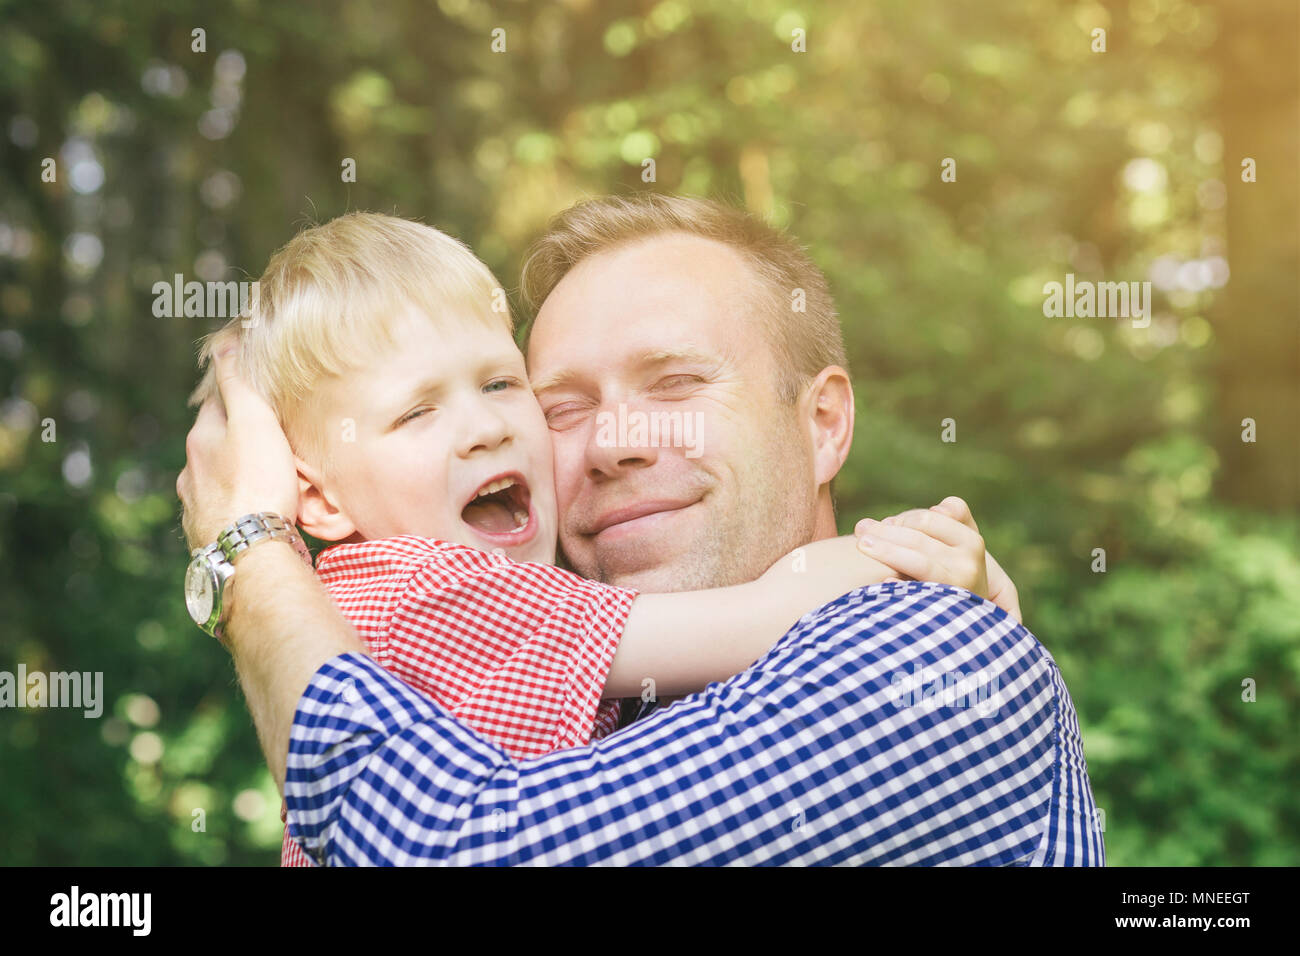 Father and son hugging and smiling. Child screaming with joy. Masculinity concept. Blondy people. Family. Stock Photo